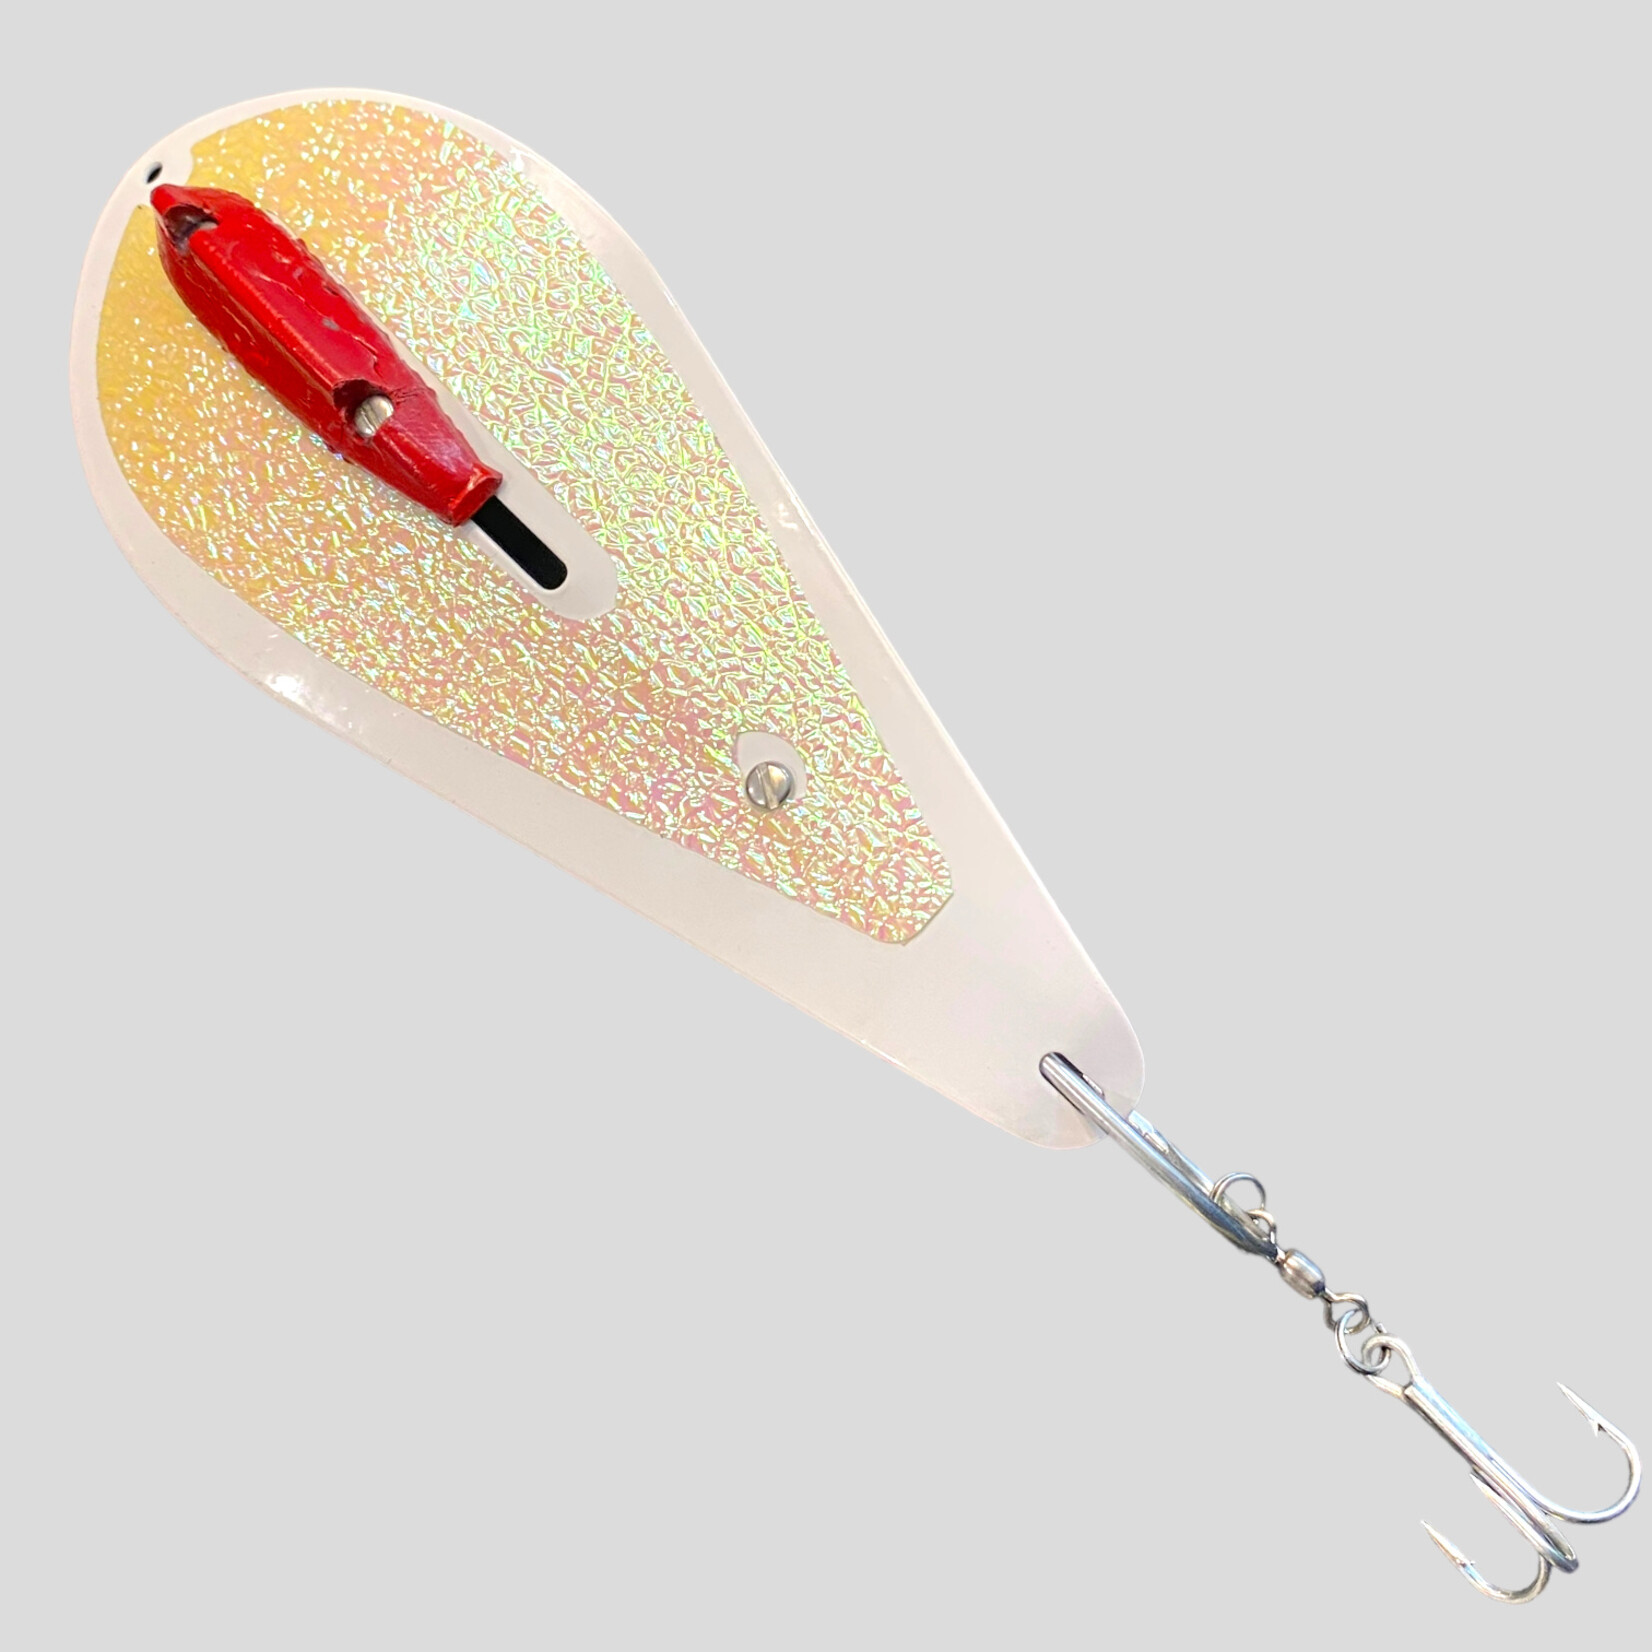 Reliable Spoon Reliable GLOW Bunker Spoon